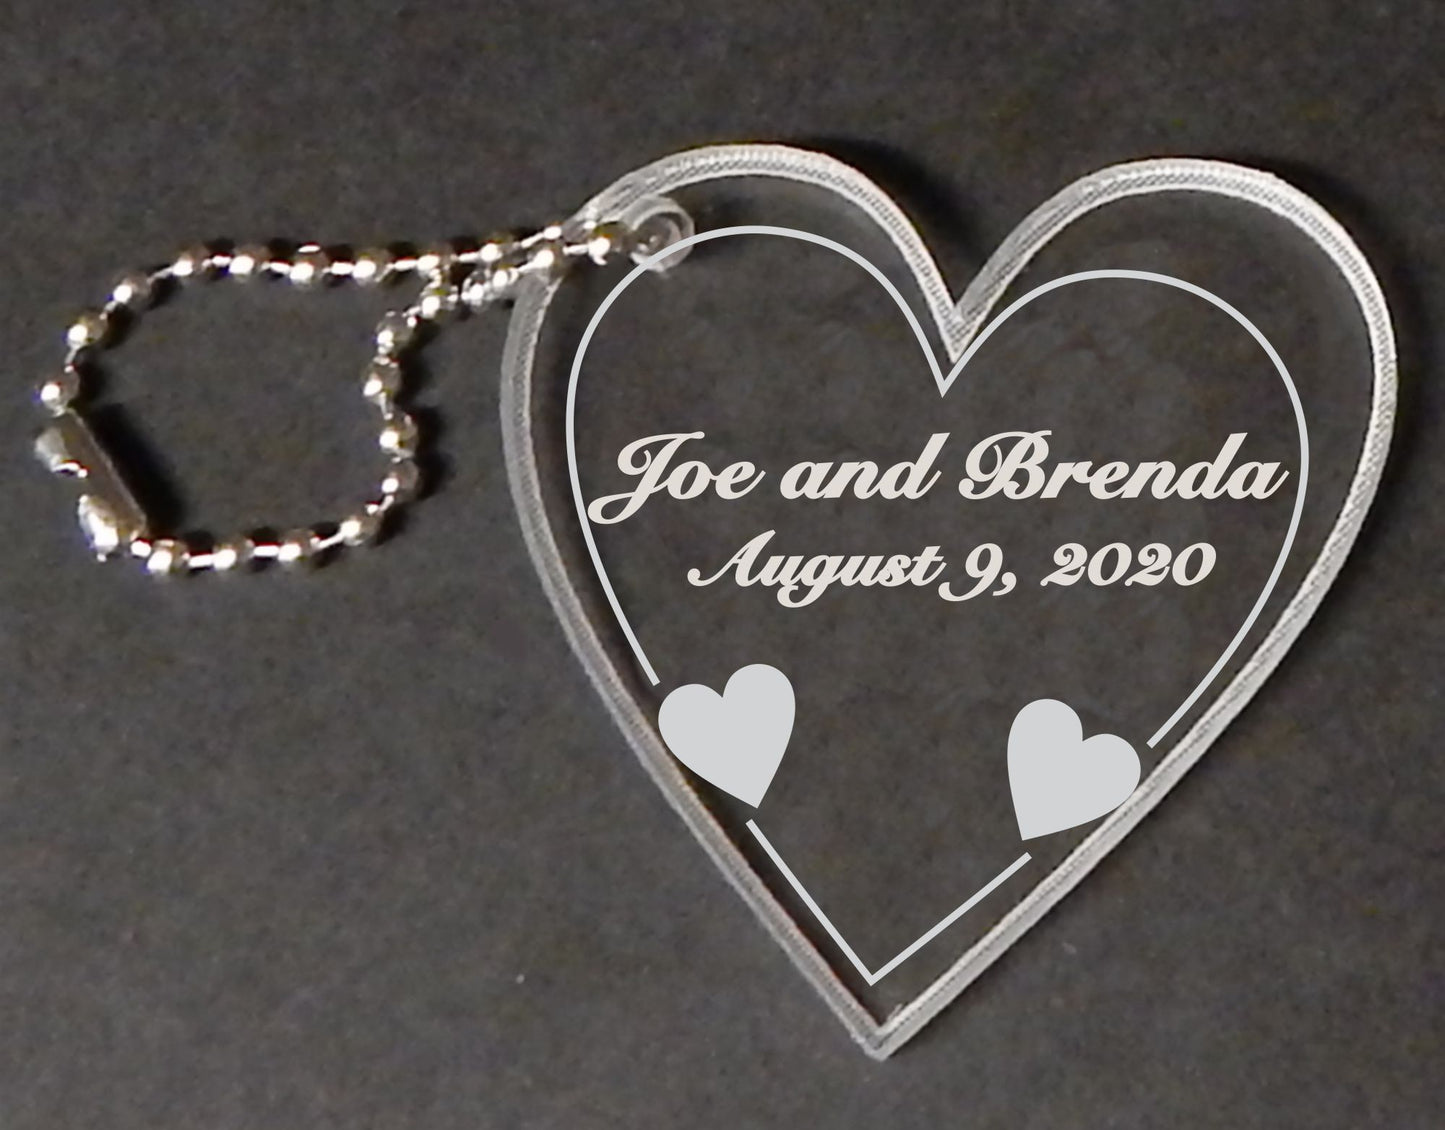 heart shaped acrylic keychain favor with names and date engraved, with attached metal chain